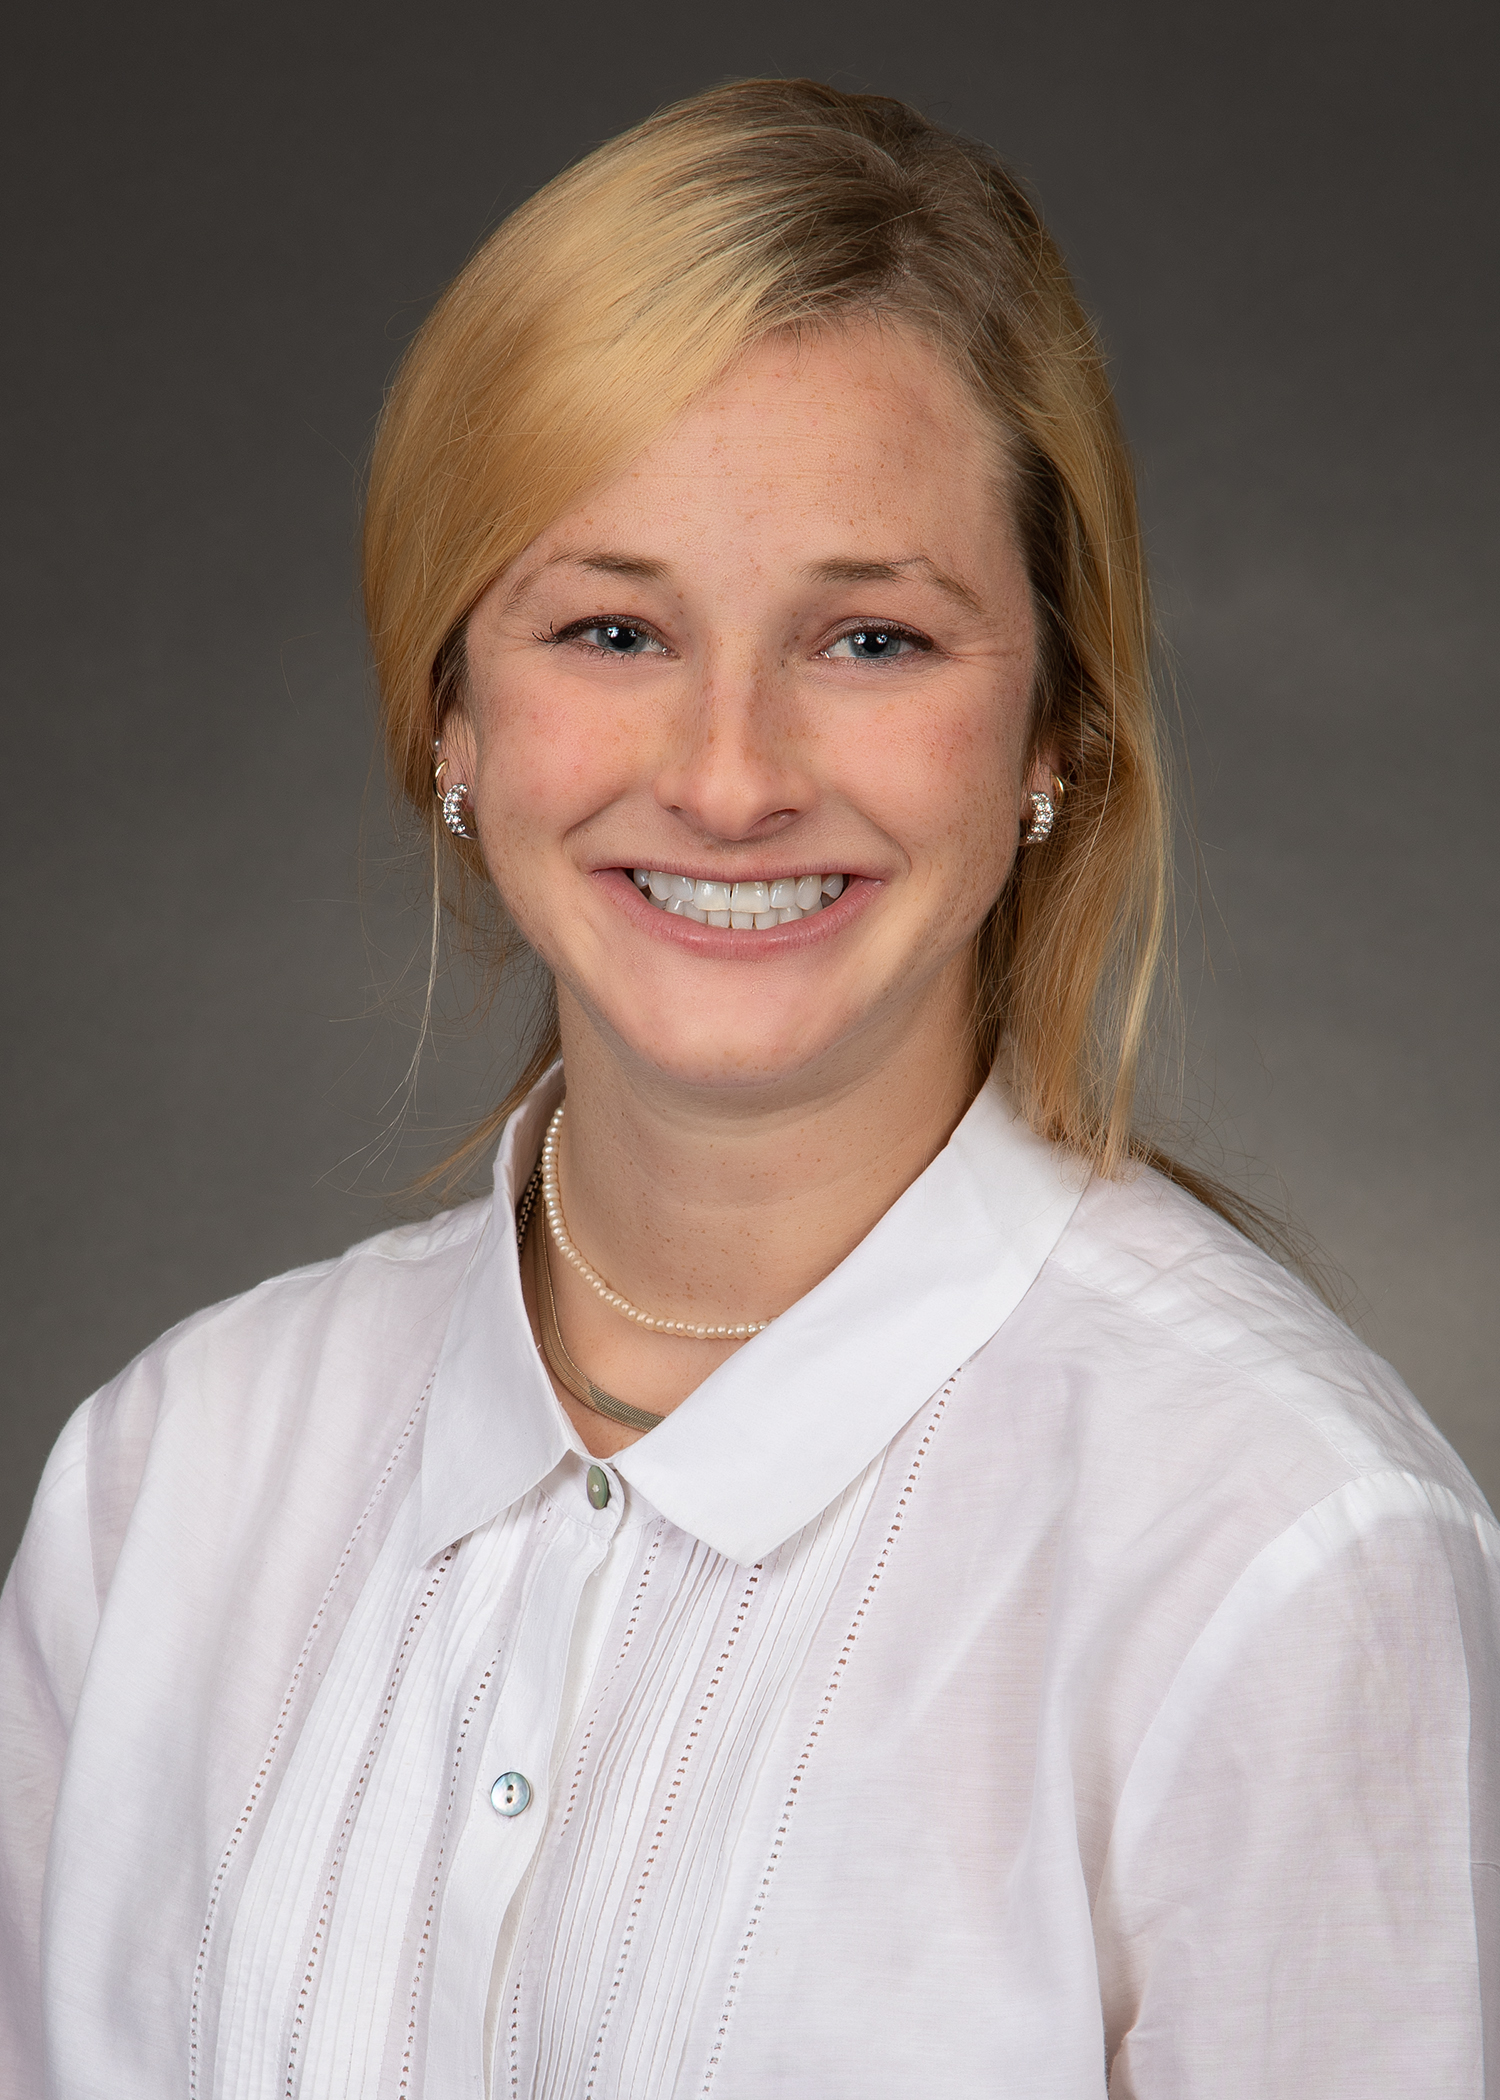 Colleen Cecola, M.D.